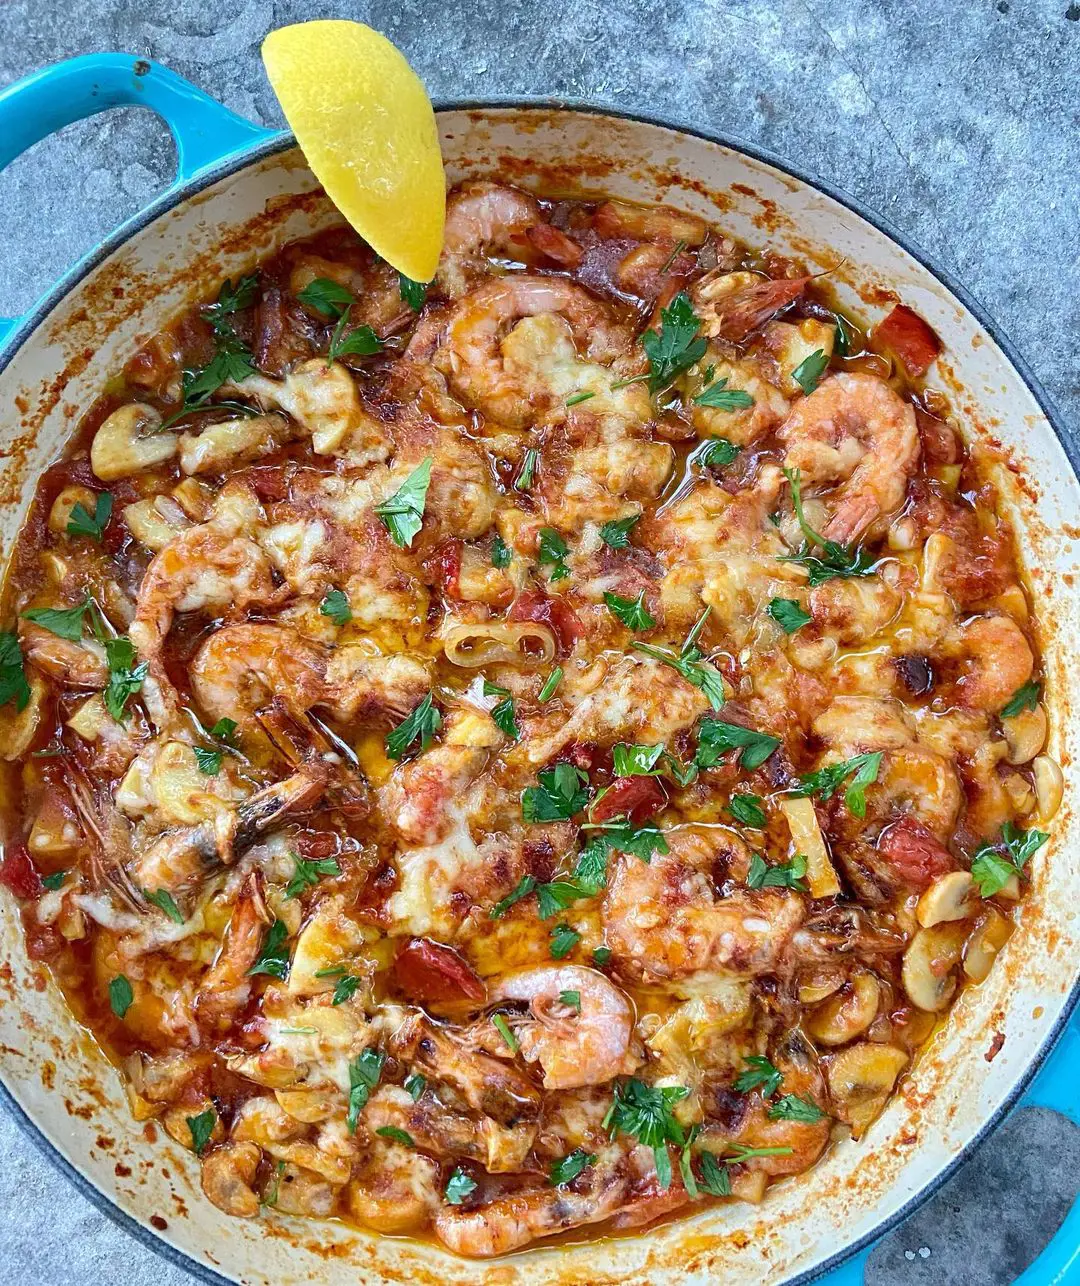 Shrimp casserole is further flavored by okra with cheese and other vegetables